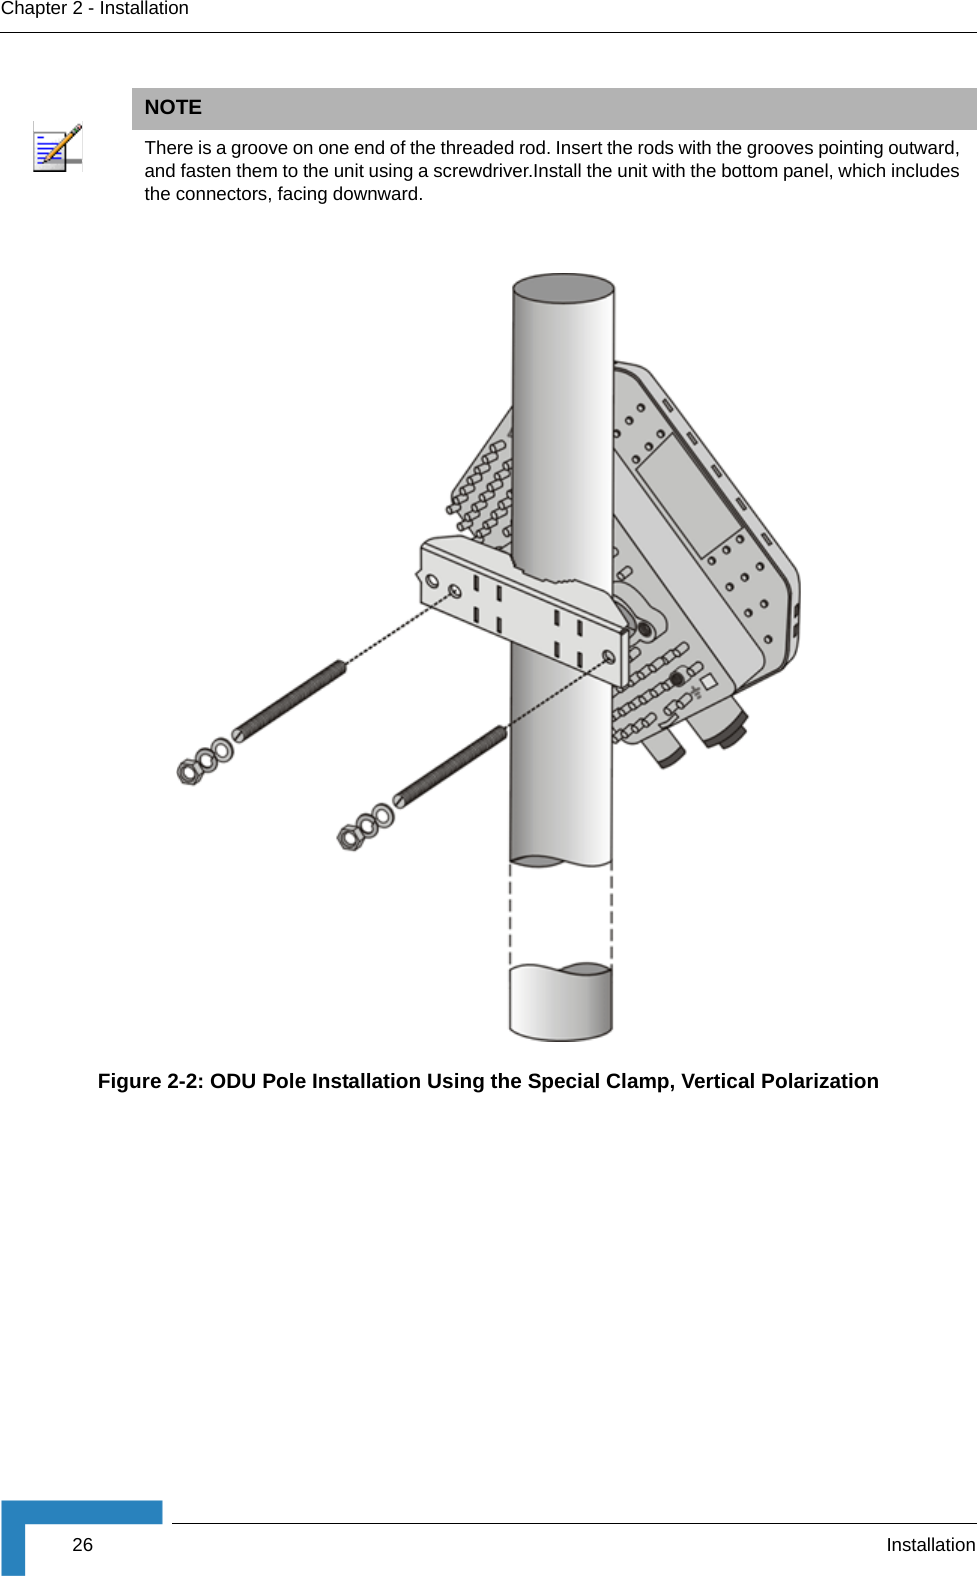 26 InstallationChapter 2 - InstallationNOTEThere is a groove on one end of the threaded rod. Insert the rods with the grooves pointing outward, and fasten them to the unit using a screwdriver.Install the unit with the bottom panel, which includes the connectors, facing downward.Figure 2-2: ODU Pole Installation Using the Special Clamp, Vertical Polarization